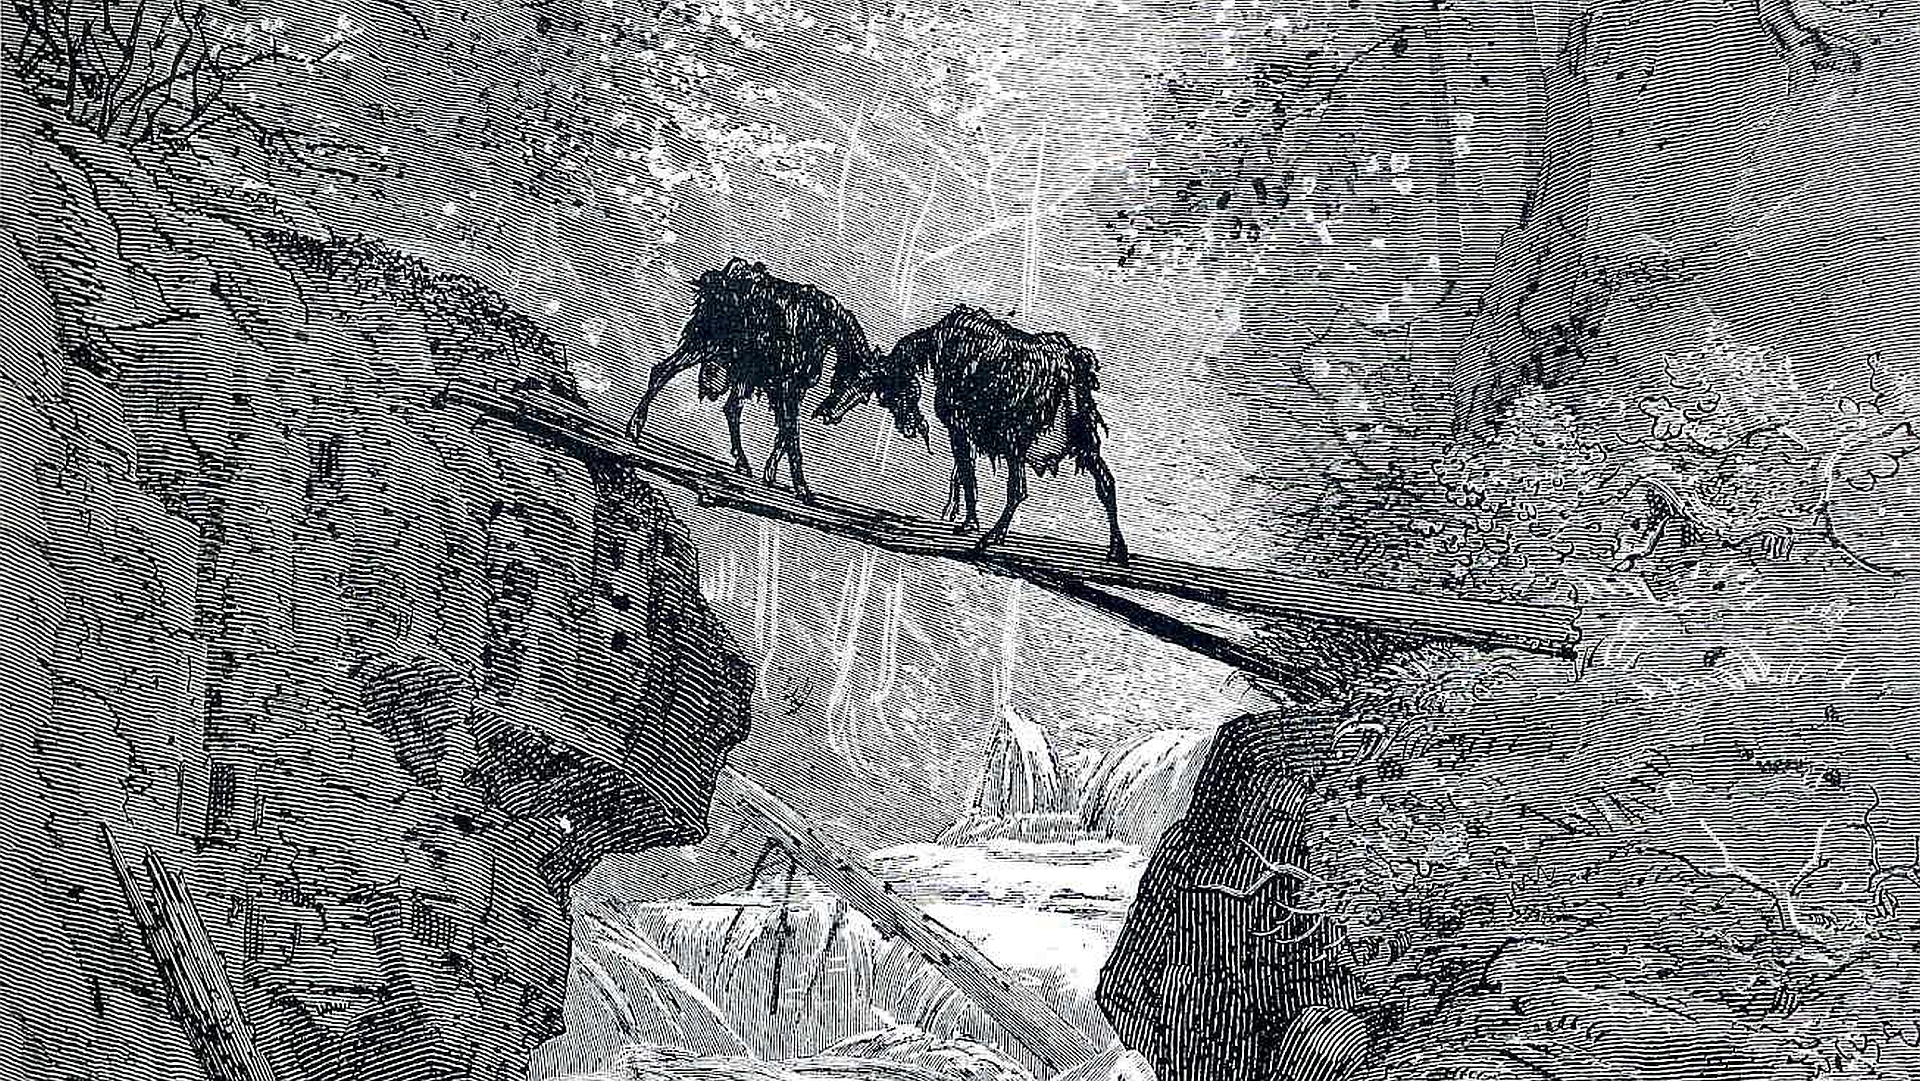 The Two Goats by Gustave Doré